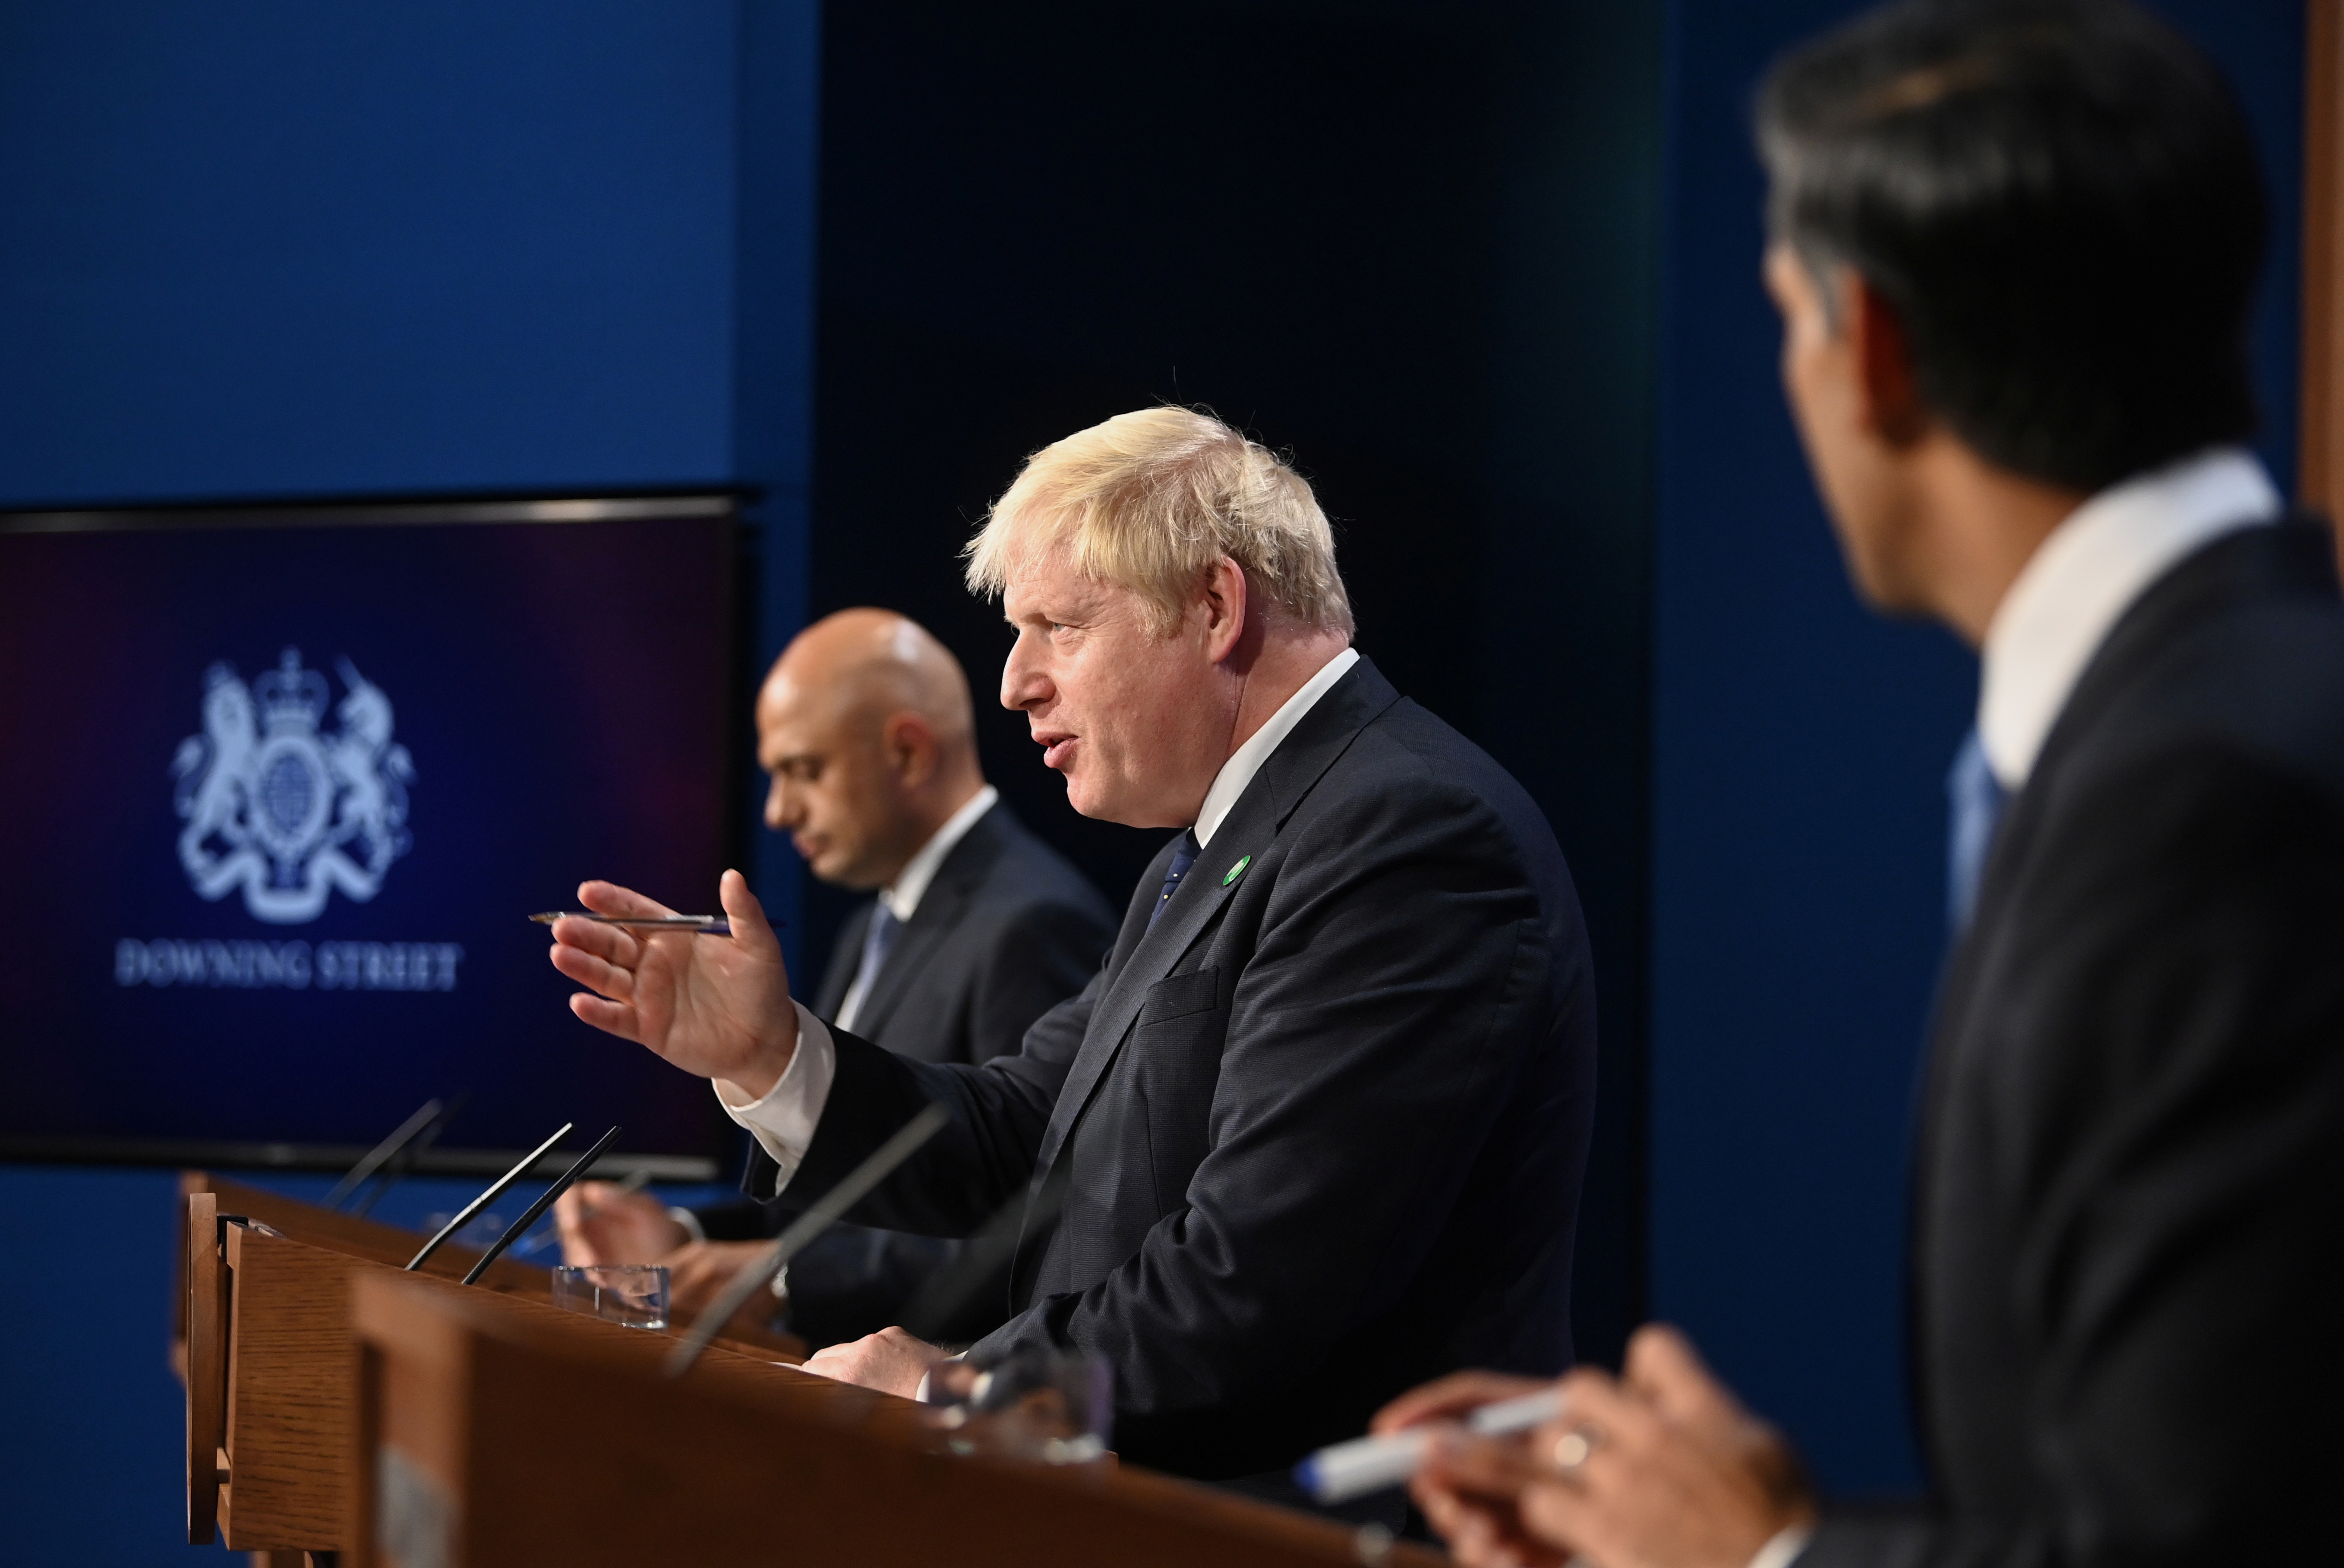 Britain's Prime Minister Johnson, Chancellor of the Exchequer Sunak and Health Secretary Javid give news conference in London